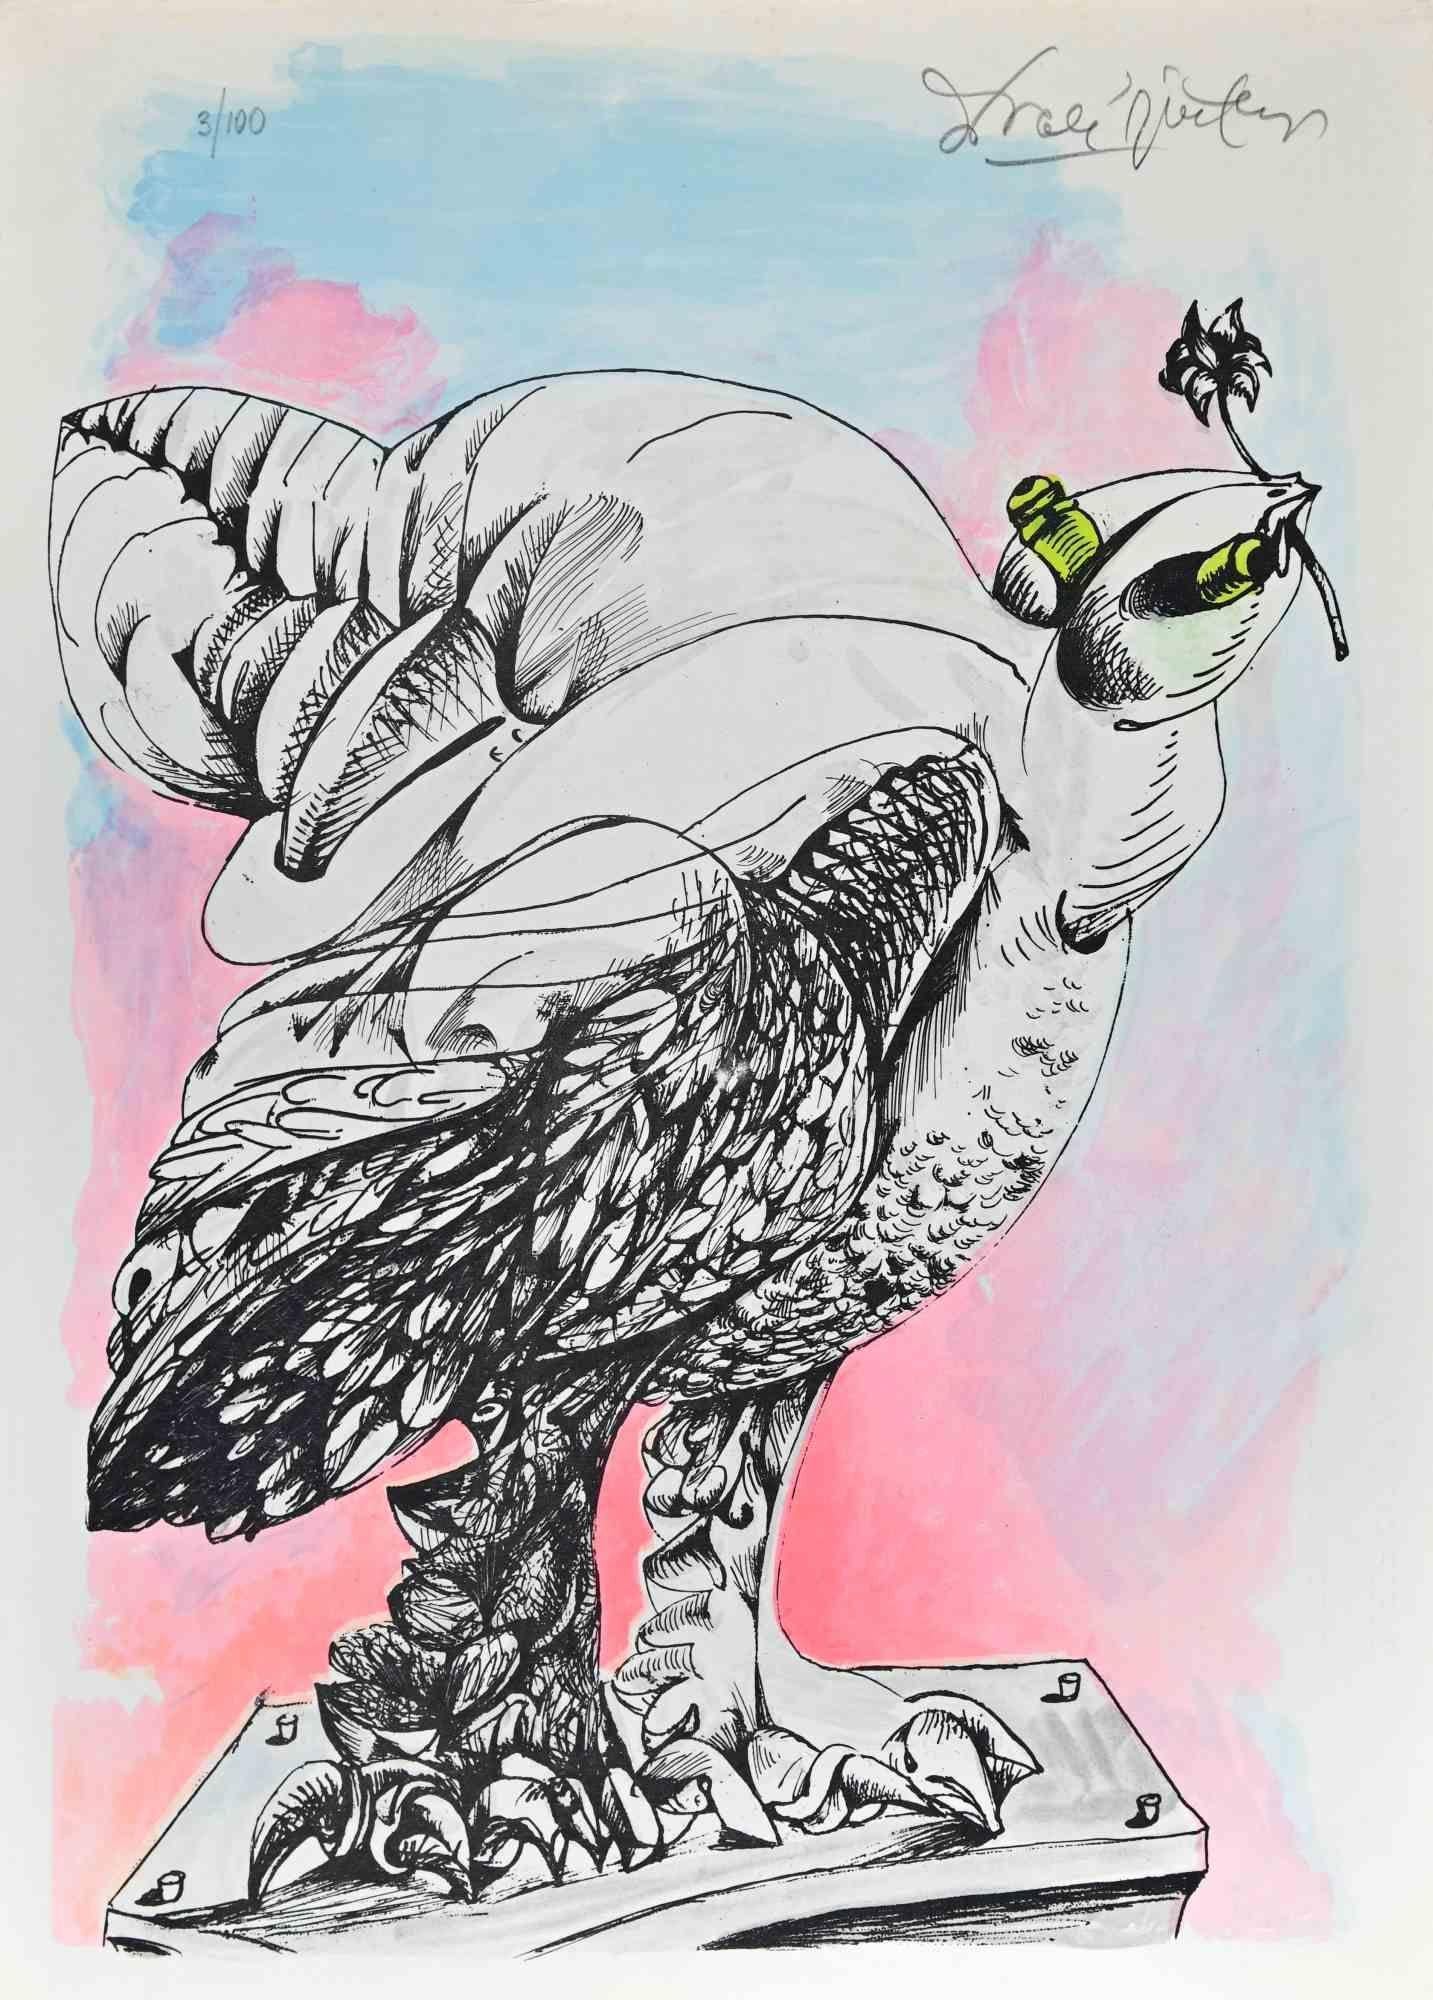 The Peace Bird is an original artwork realized by Ercole Pignatelli in 1972. Colored lithograph.

Hand-signed and numbered by the artist in pencil at the top. Edition of 100. The artwork is printed by "la nuova foglio s.p.a., label on the back. 